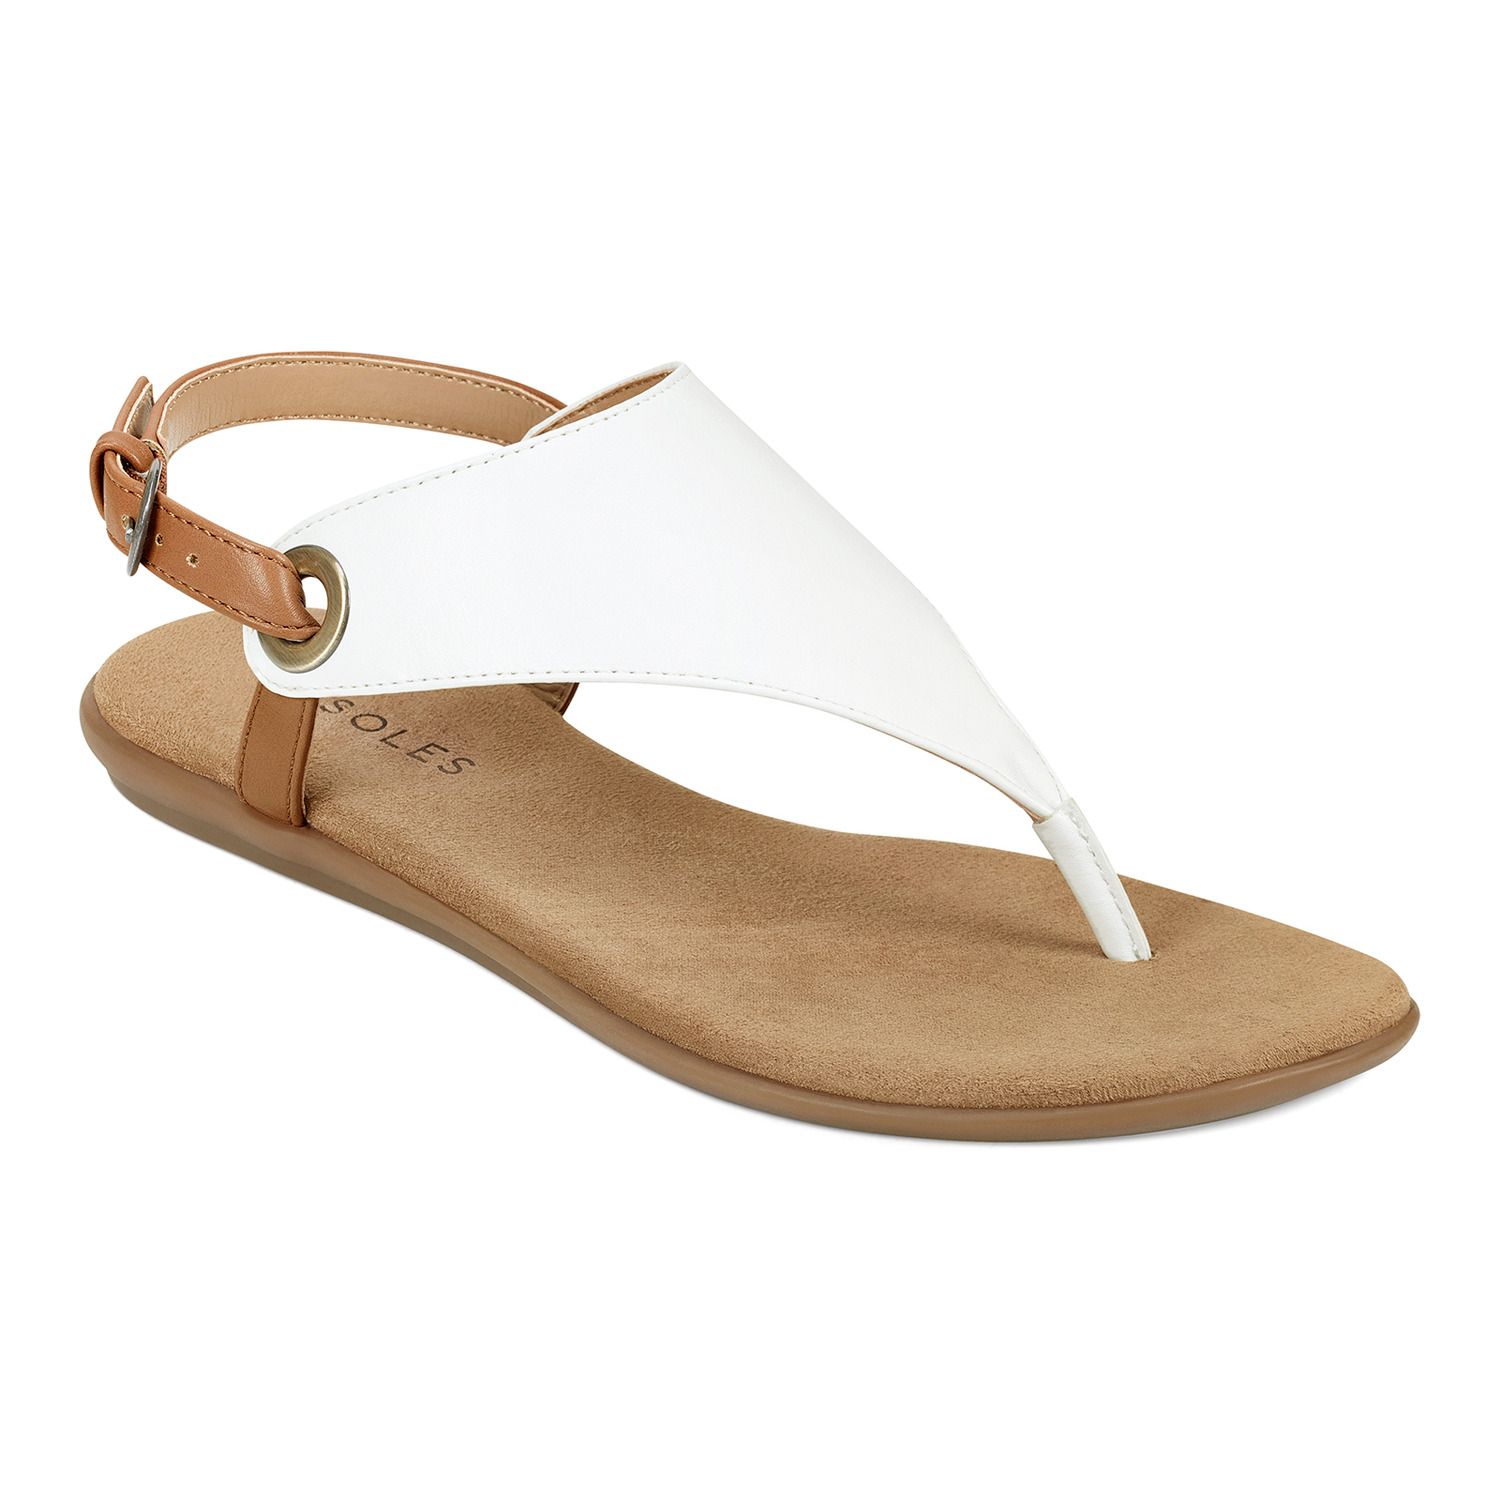 in conchlusion sandal